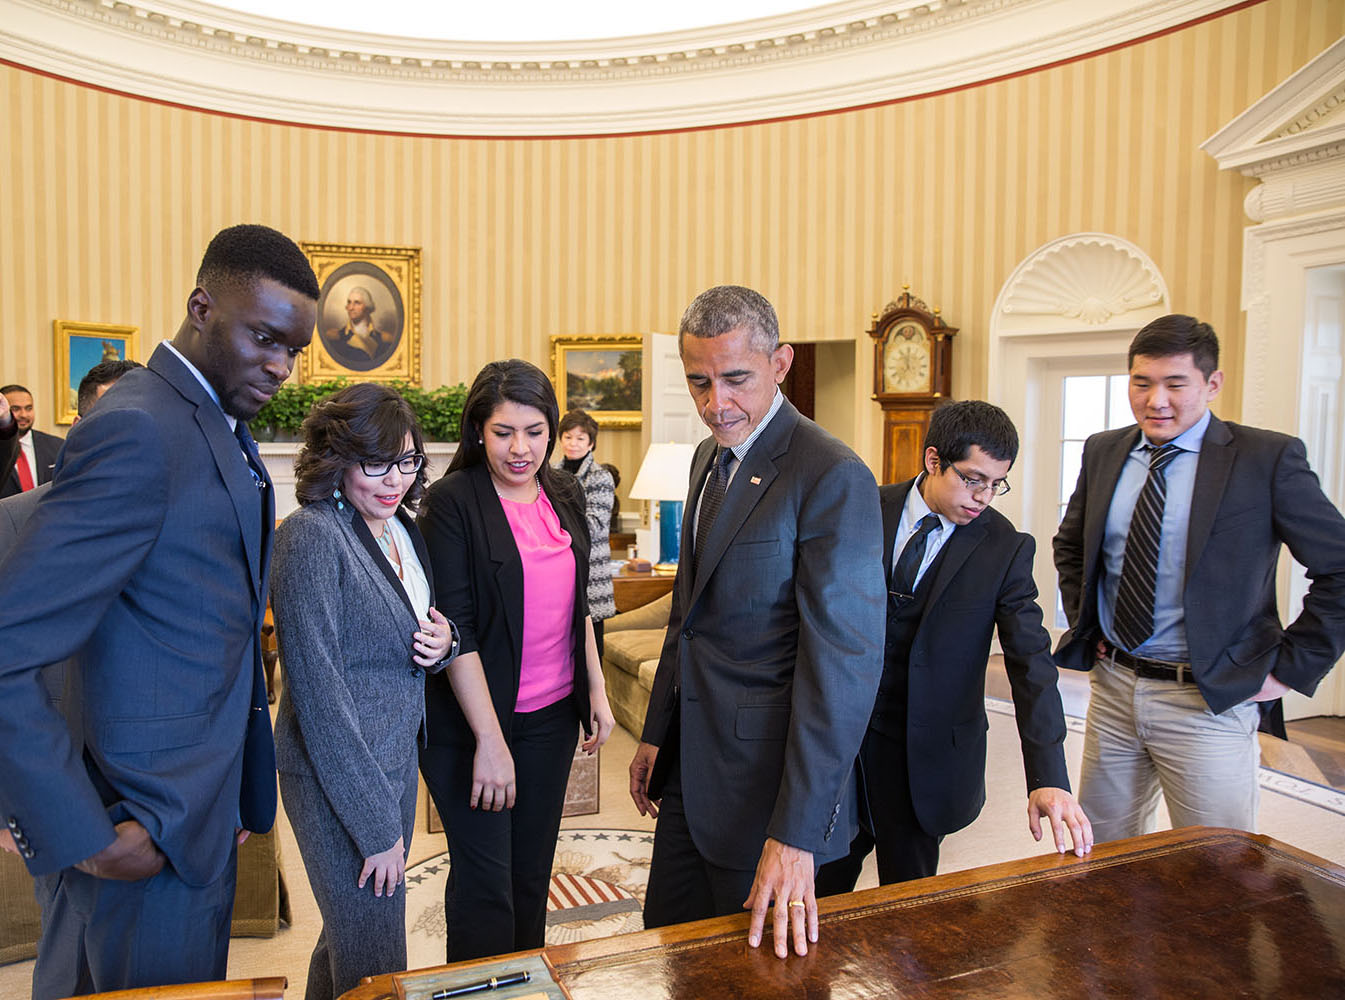 President Barack Obama shows the Resolute Desk to a group of DREAMers, following their Oval Office meeting in which they talked about how they have benefited from the Deferred Action for Childhood Arrivals (DACA) program, Feb. 4, 2015. (Official White Hou